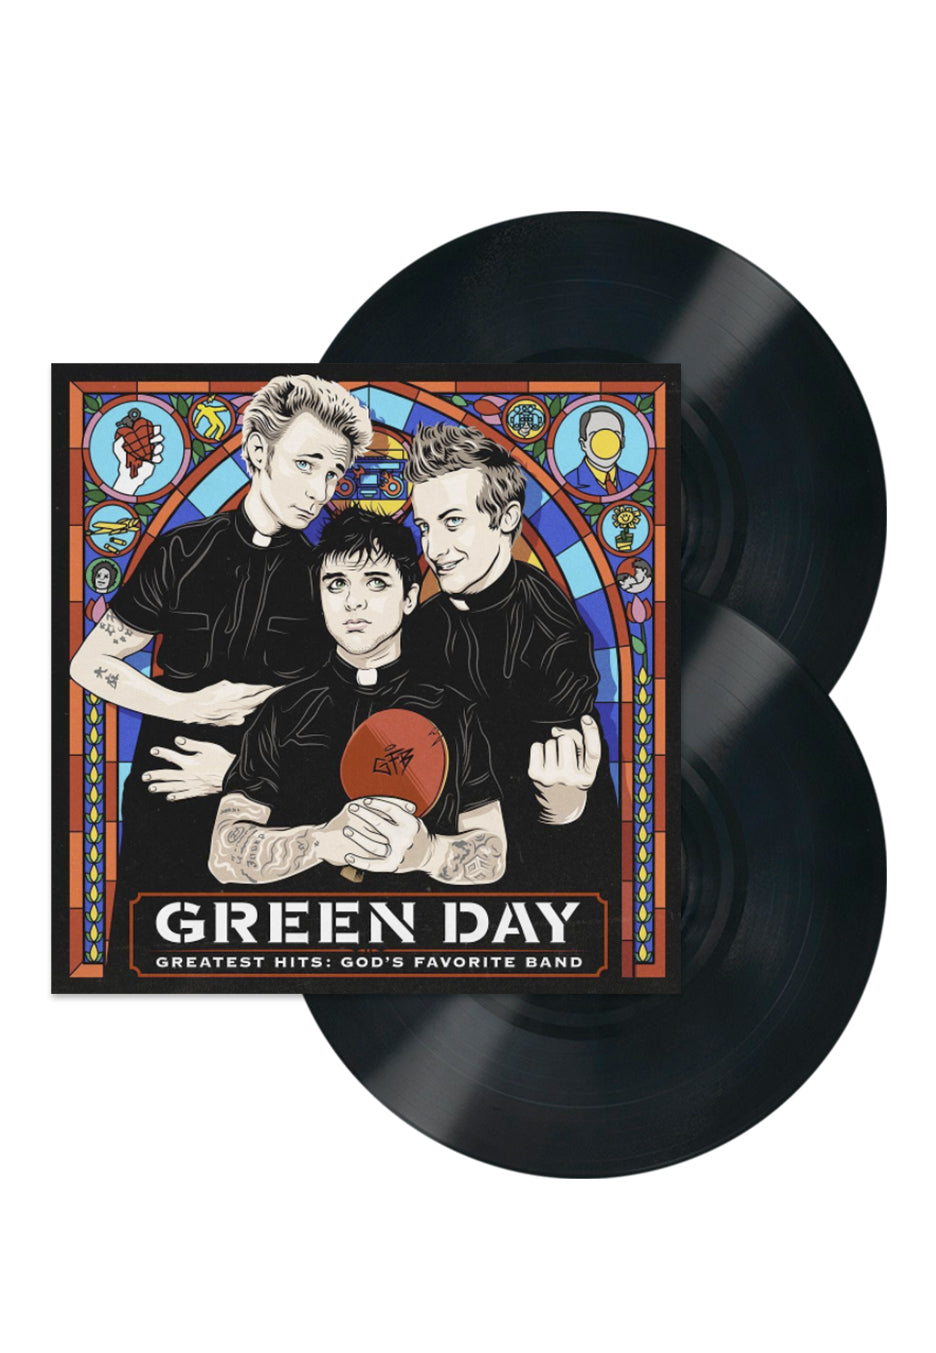 Green Day - Greatest Hits: God's Favorite Band - 2 Vinyl